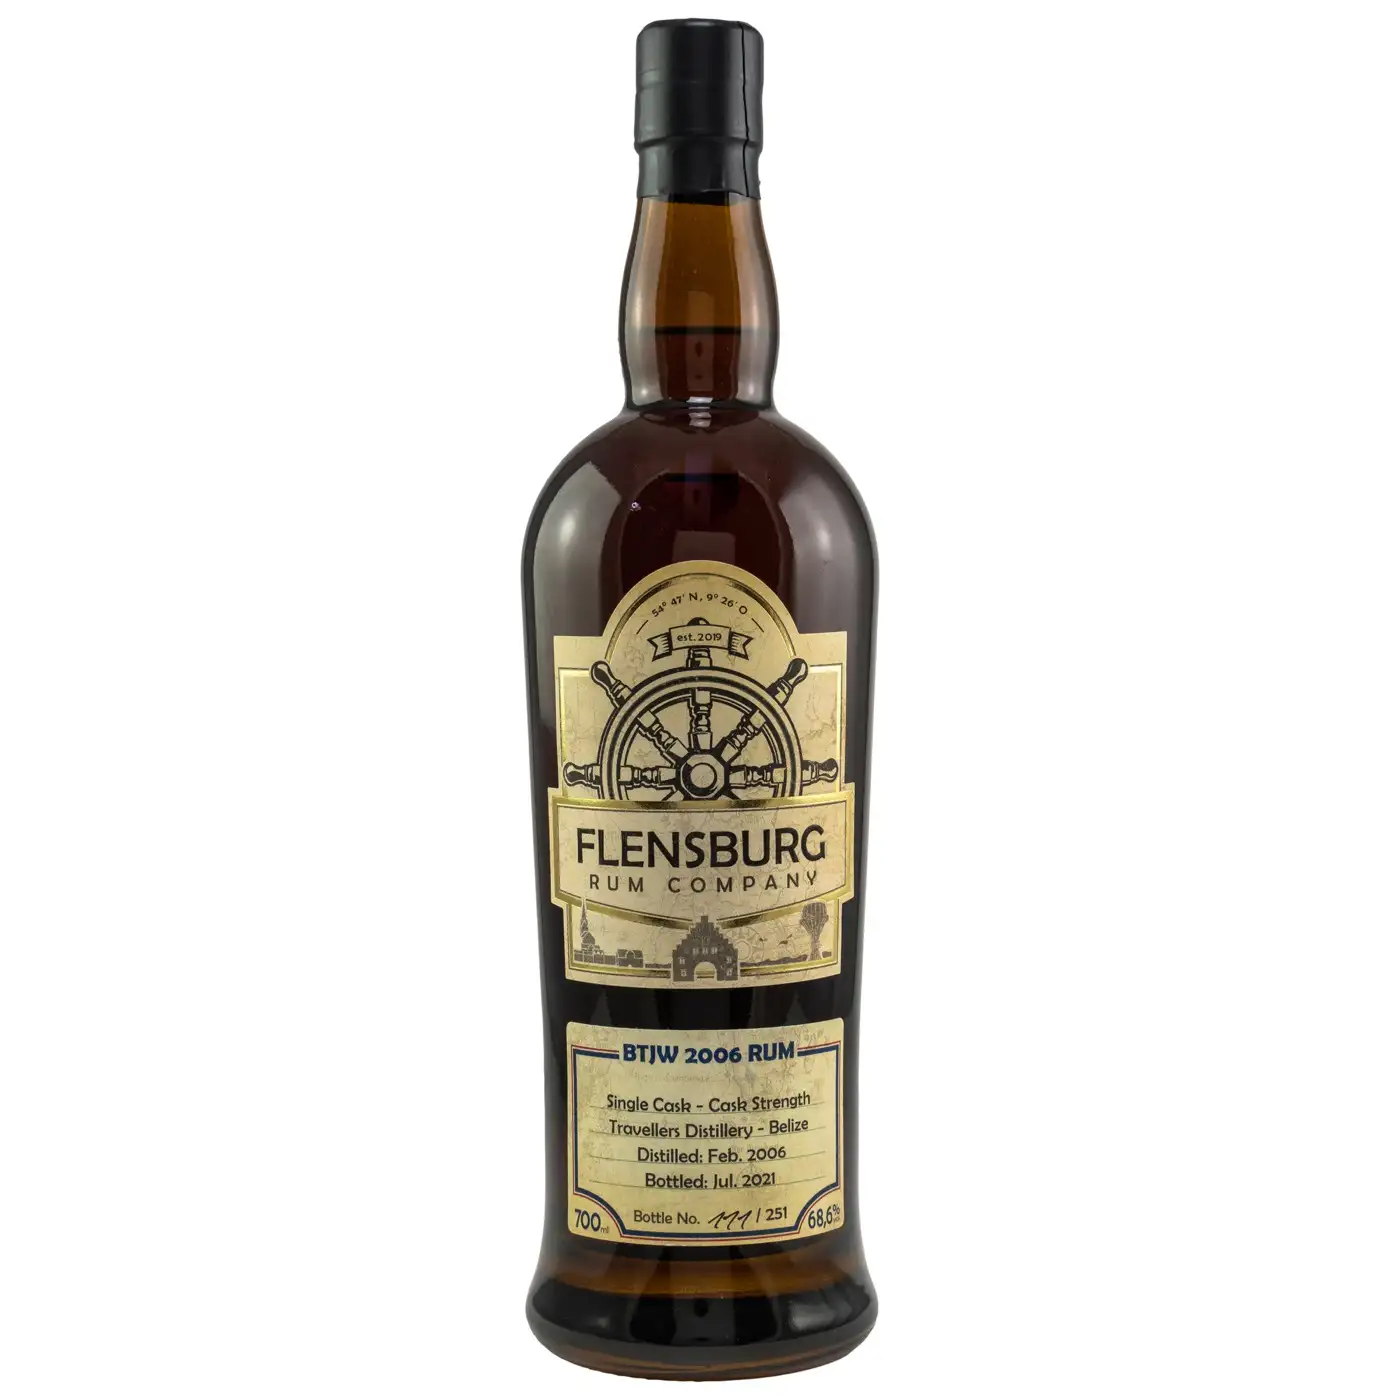 Image of the front of the bottle of the rum Flensburg Rum Company Selected by Jürgen Wiese BTJW